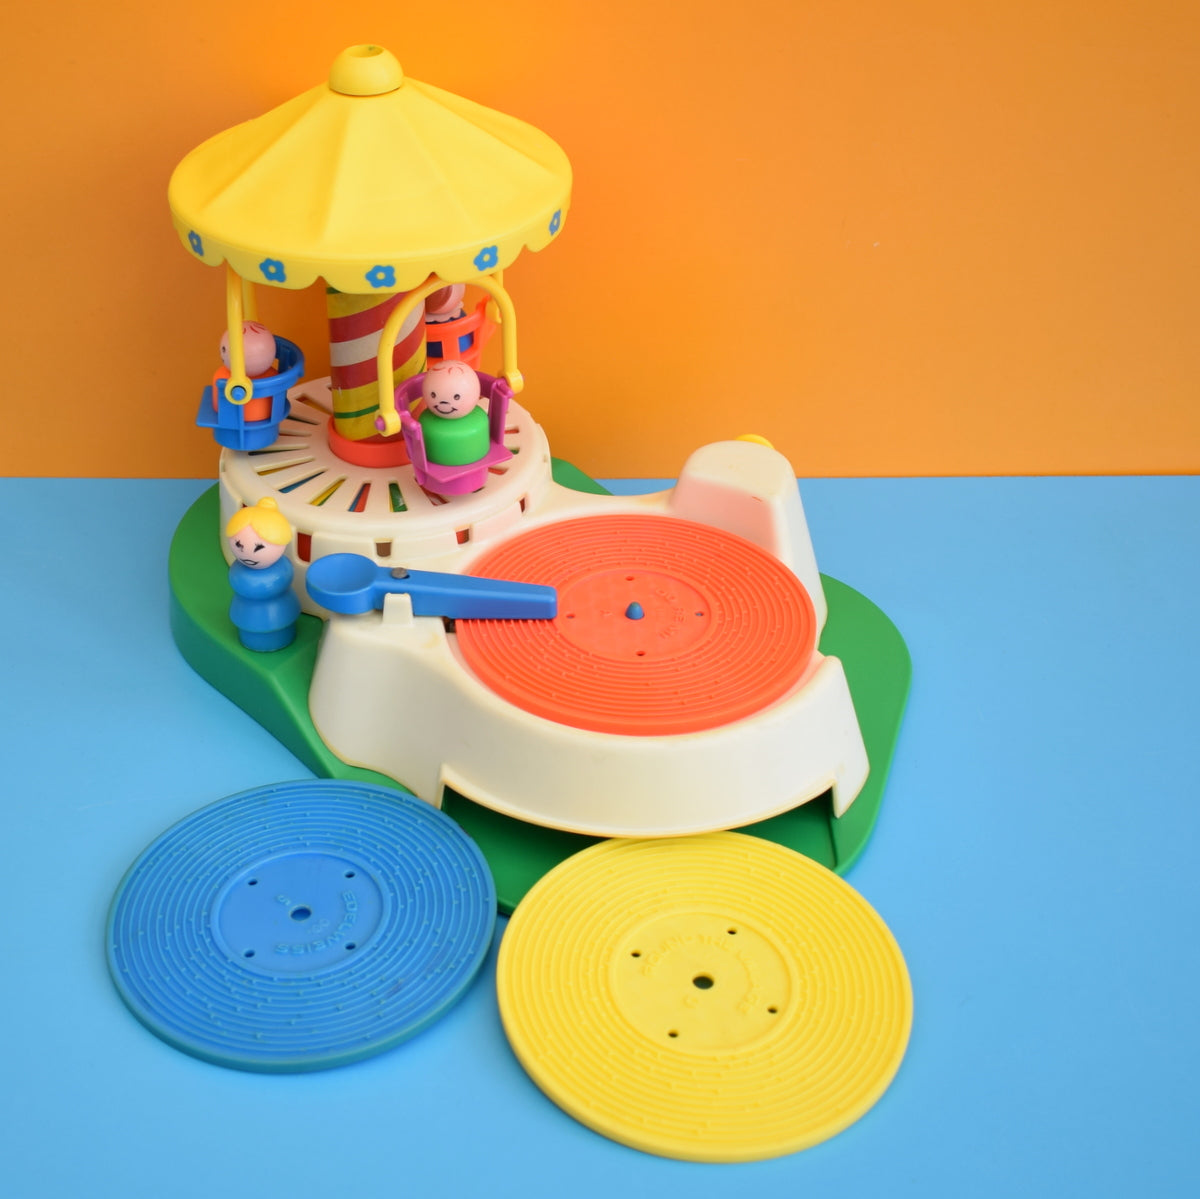 Vintage 1970s Fisher Price Merry-Go-Round - Record Player